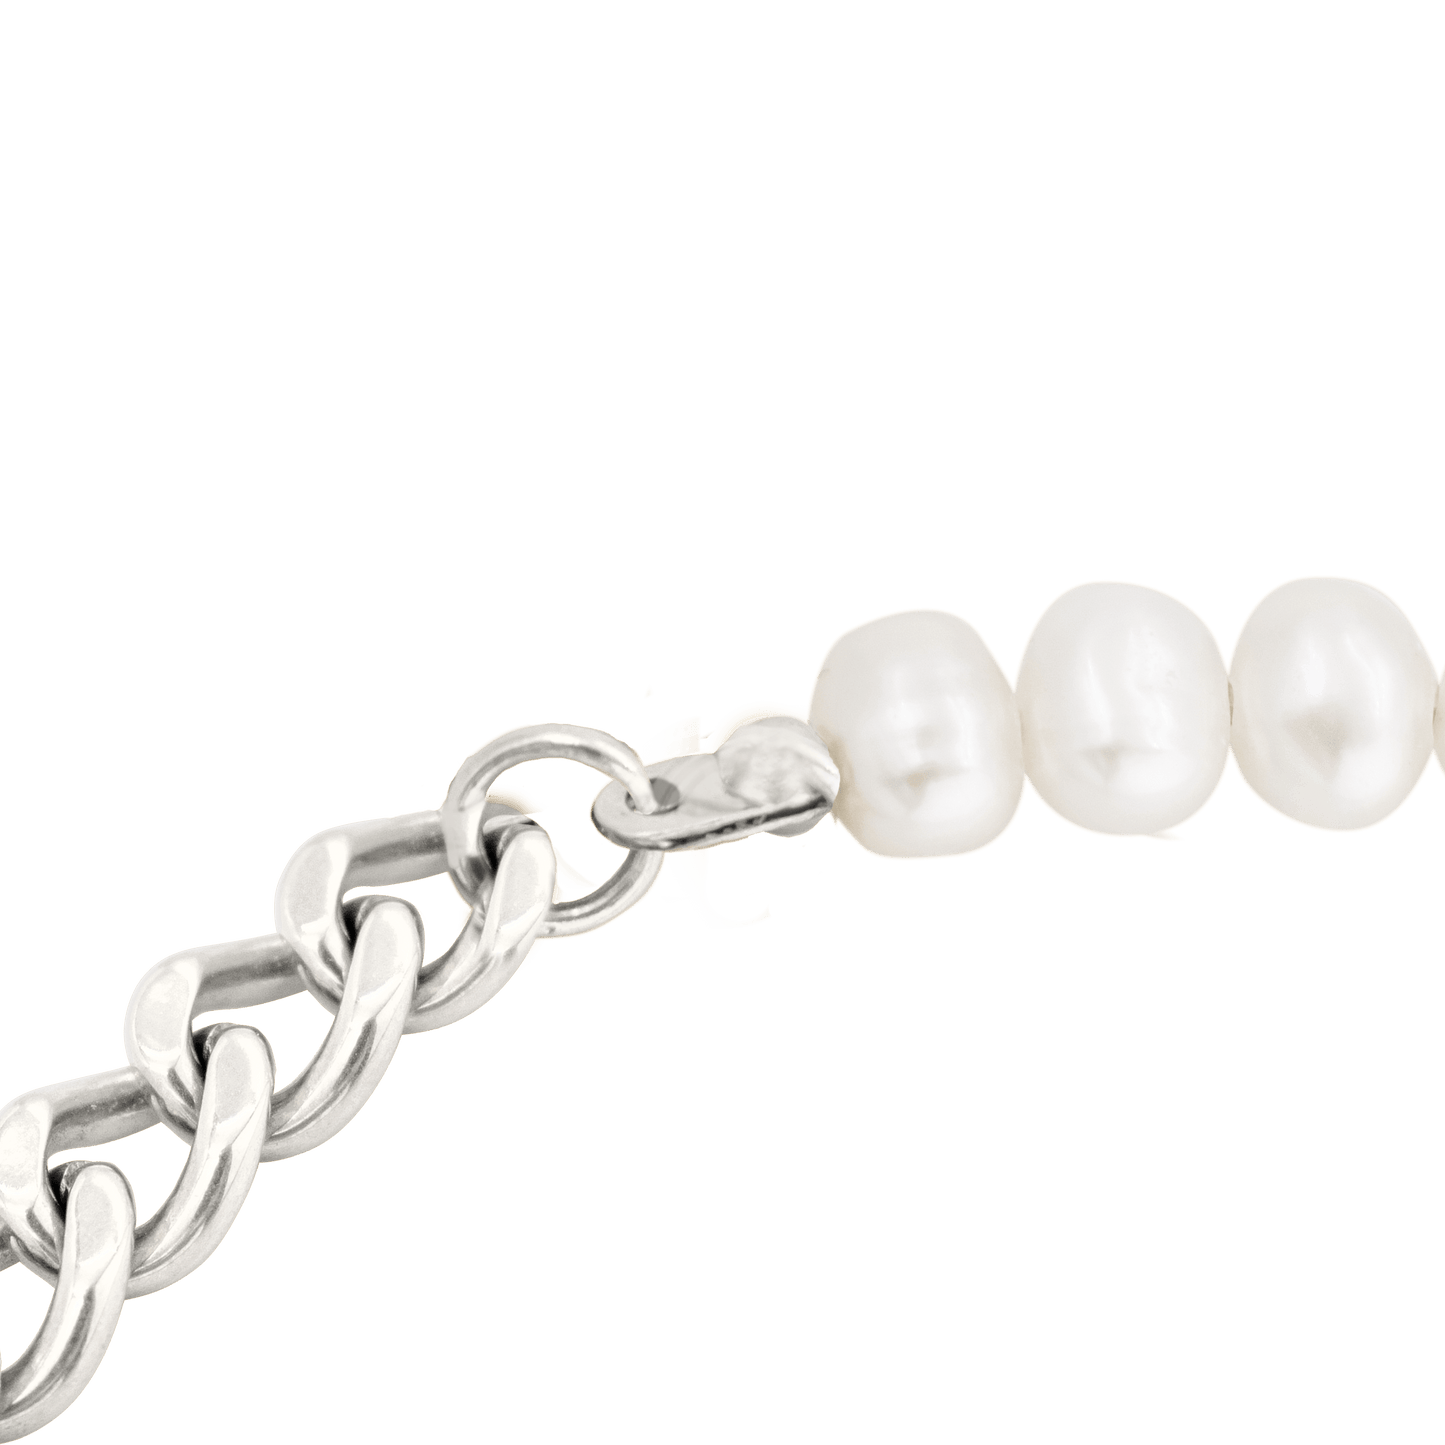 Chain'n'Pearls Necklace Silver